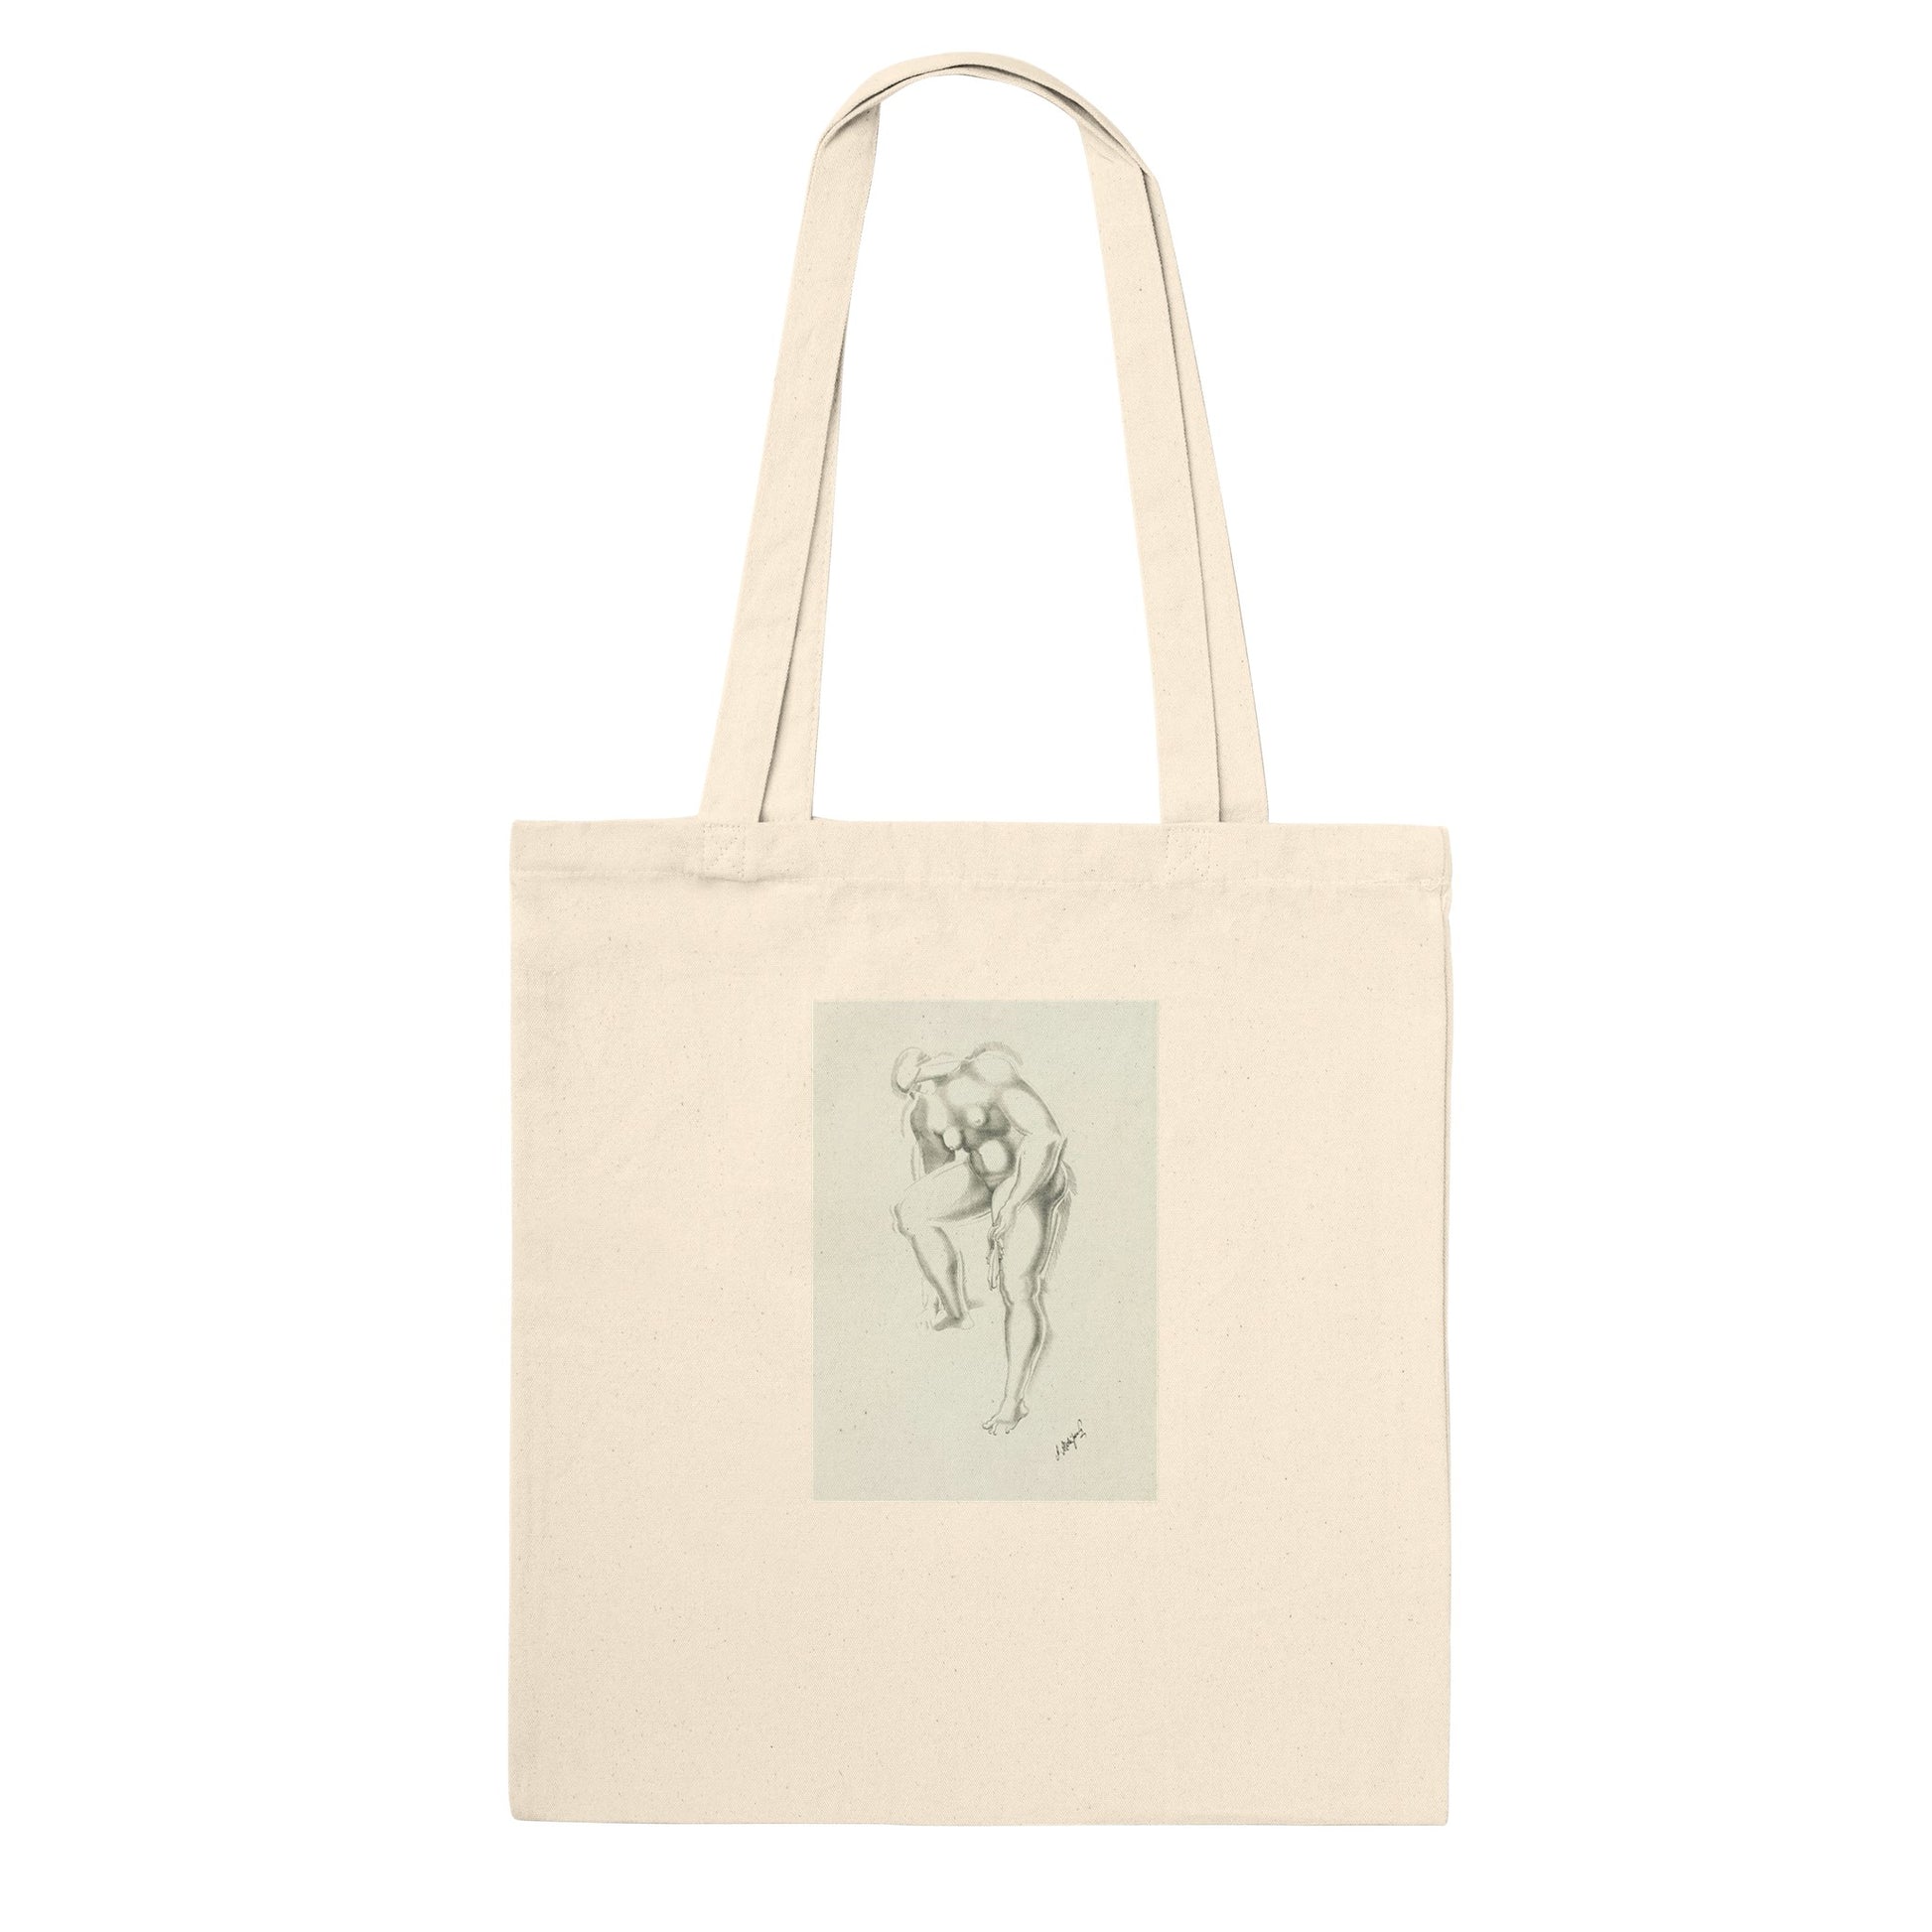 077a131AFTER AUGUSTE RODIN - ABSTRACT NUDE - CLASSIC TOTE BAG